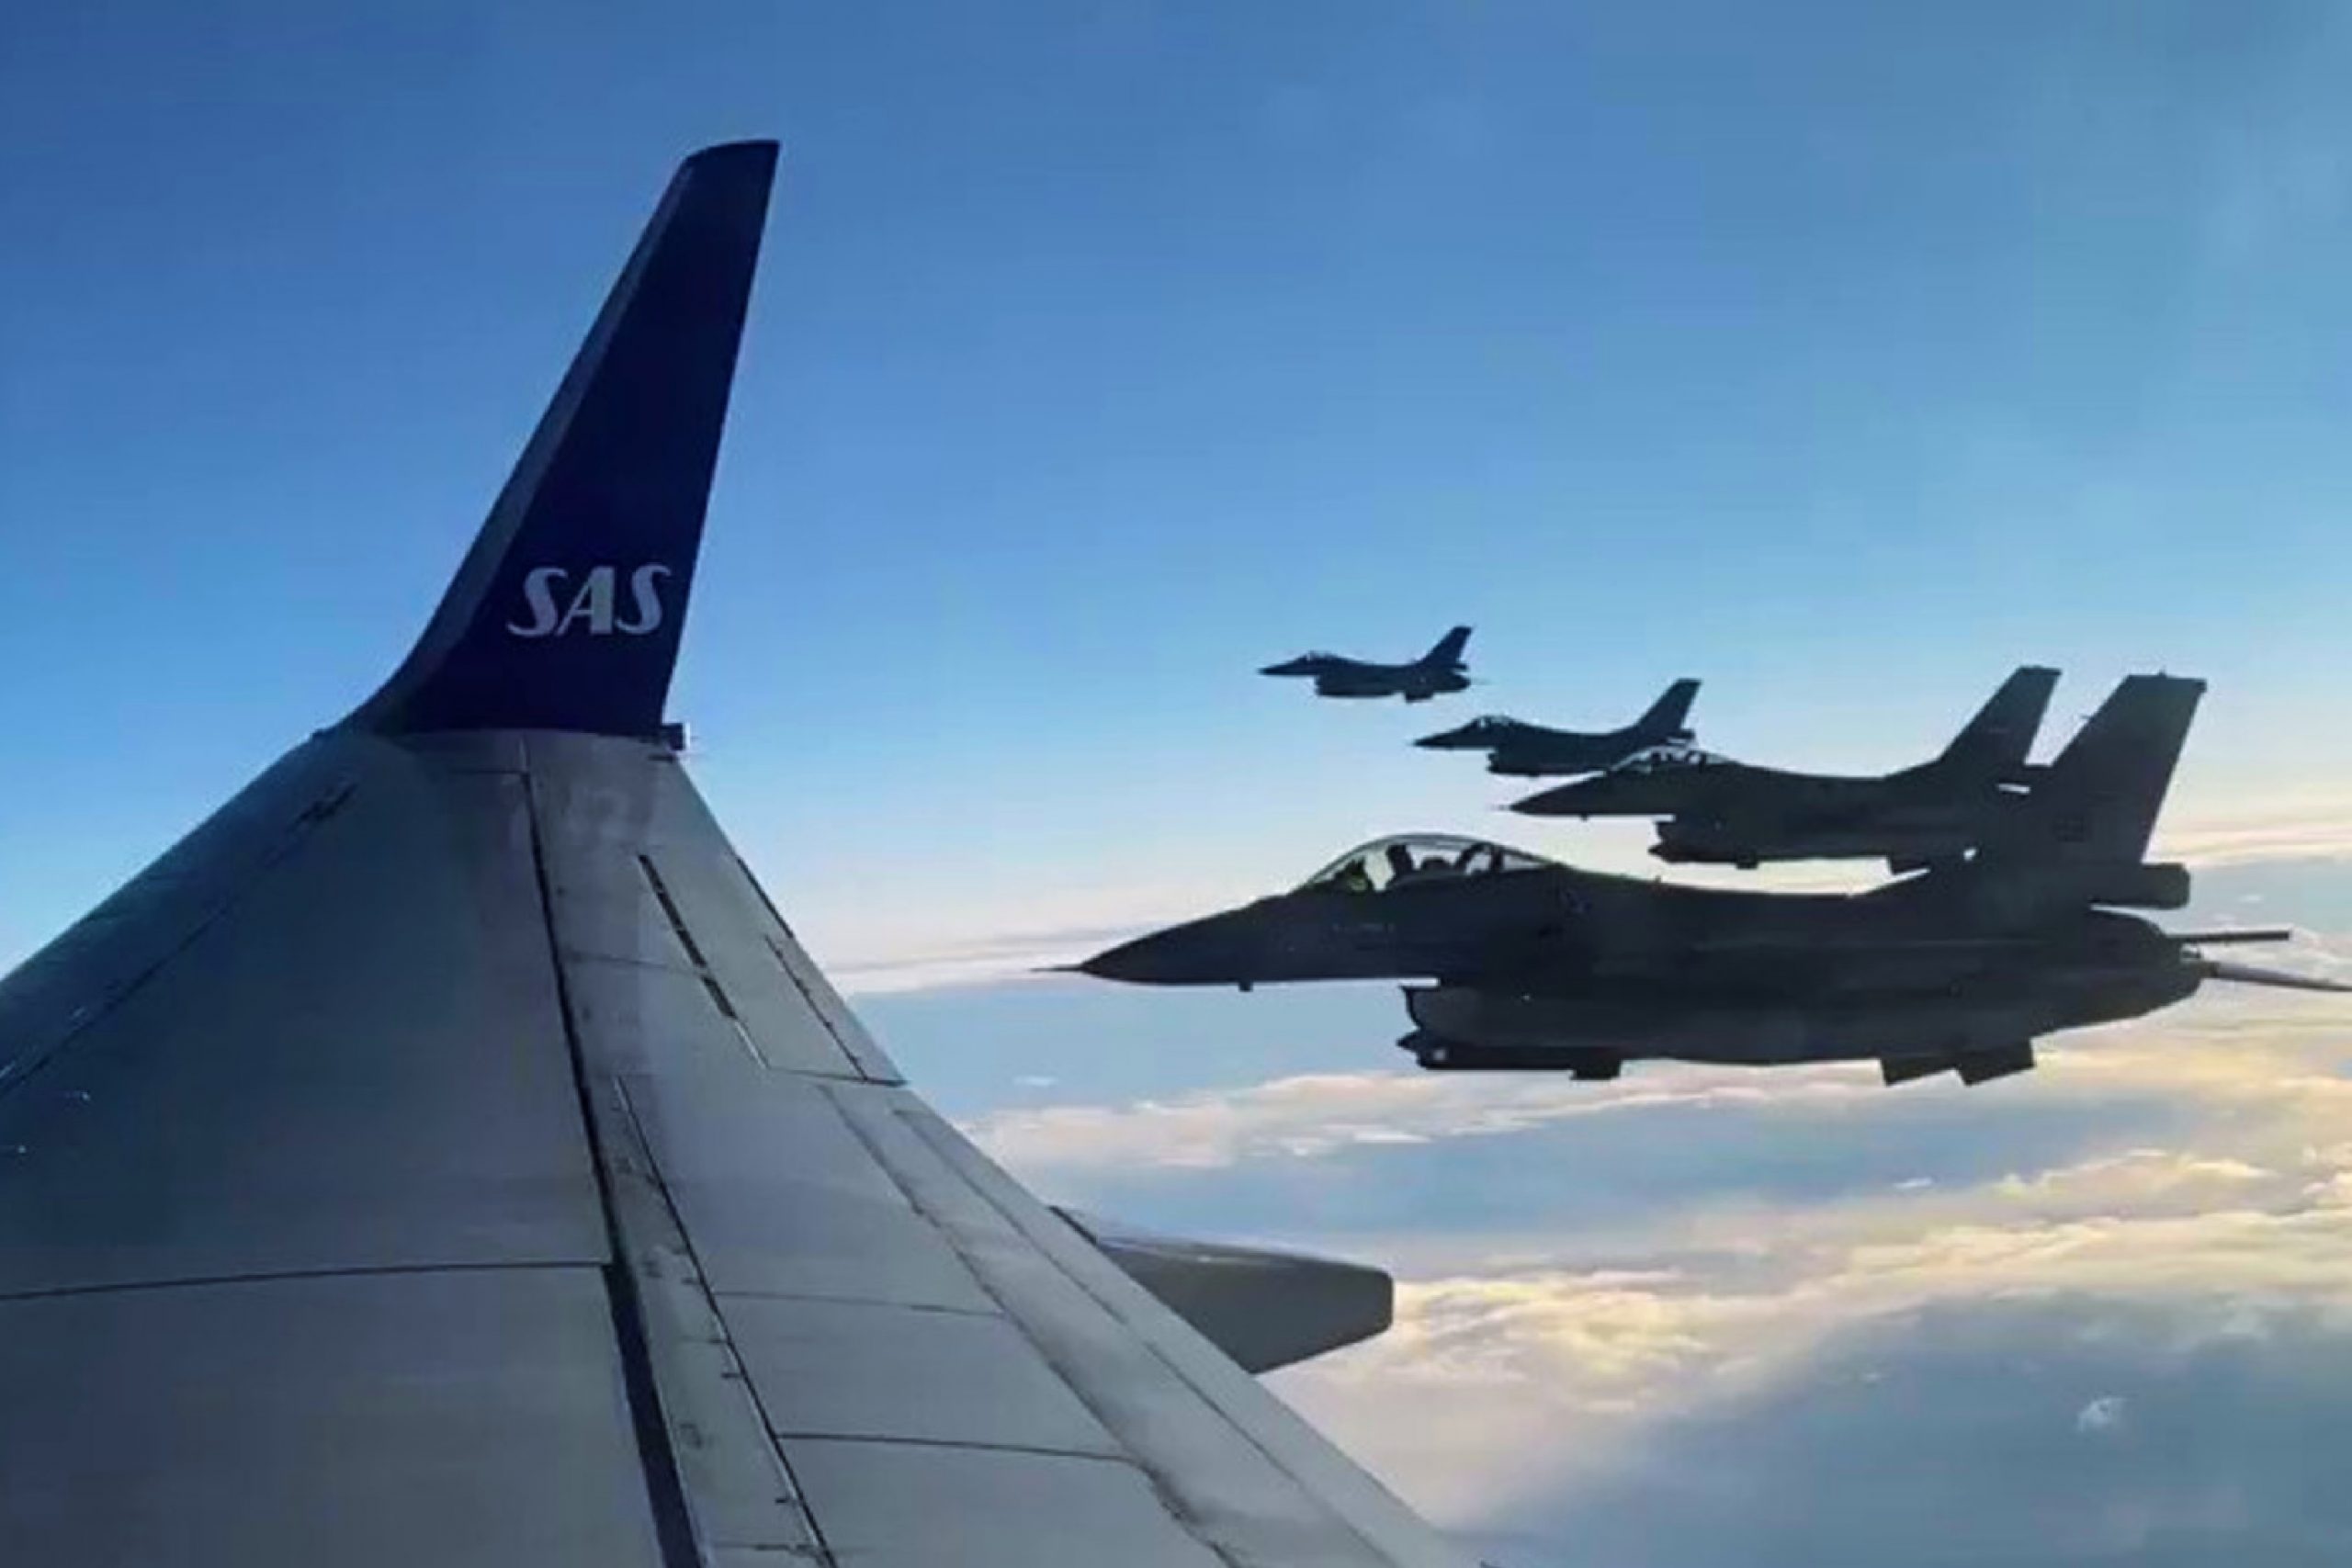 Norwegian champions Bodo_Glimt escorted by F-16s on their way home after winning the title